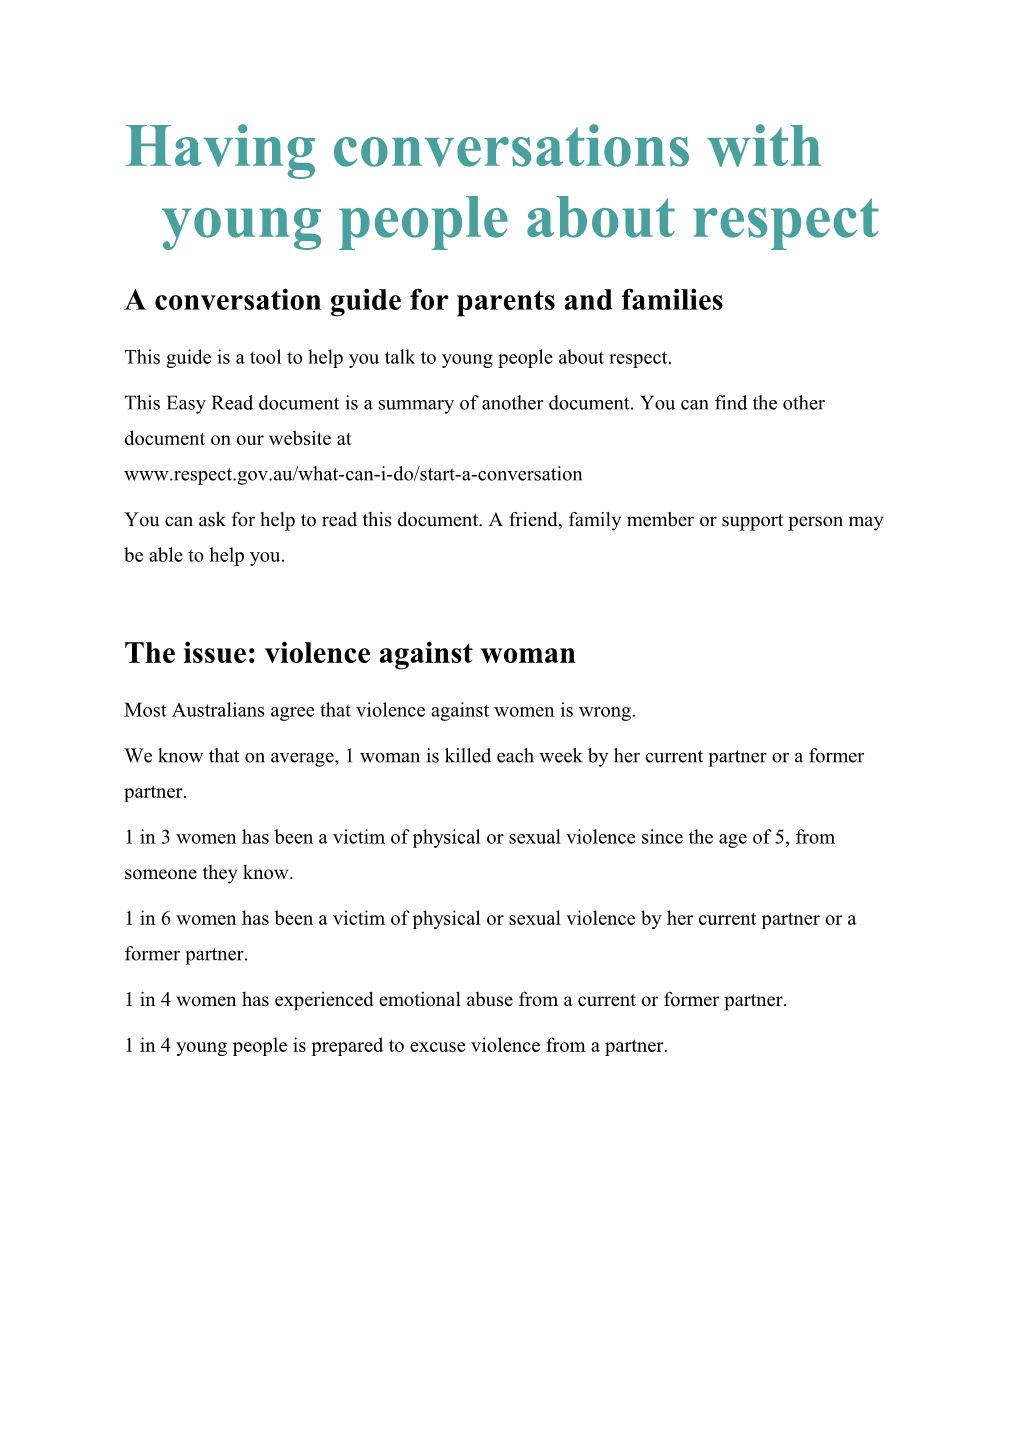 Having Conversations with Young People About Respect